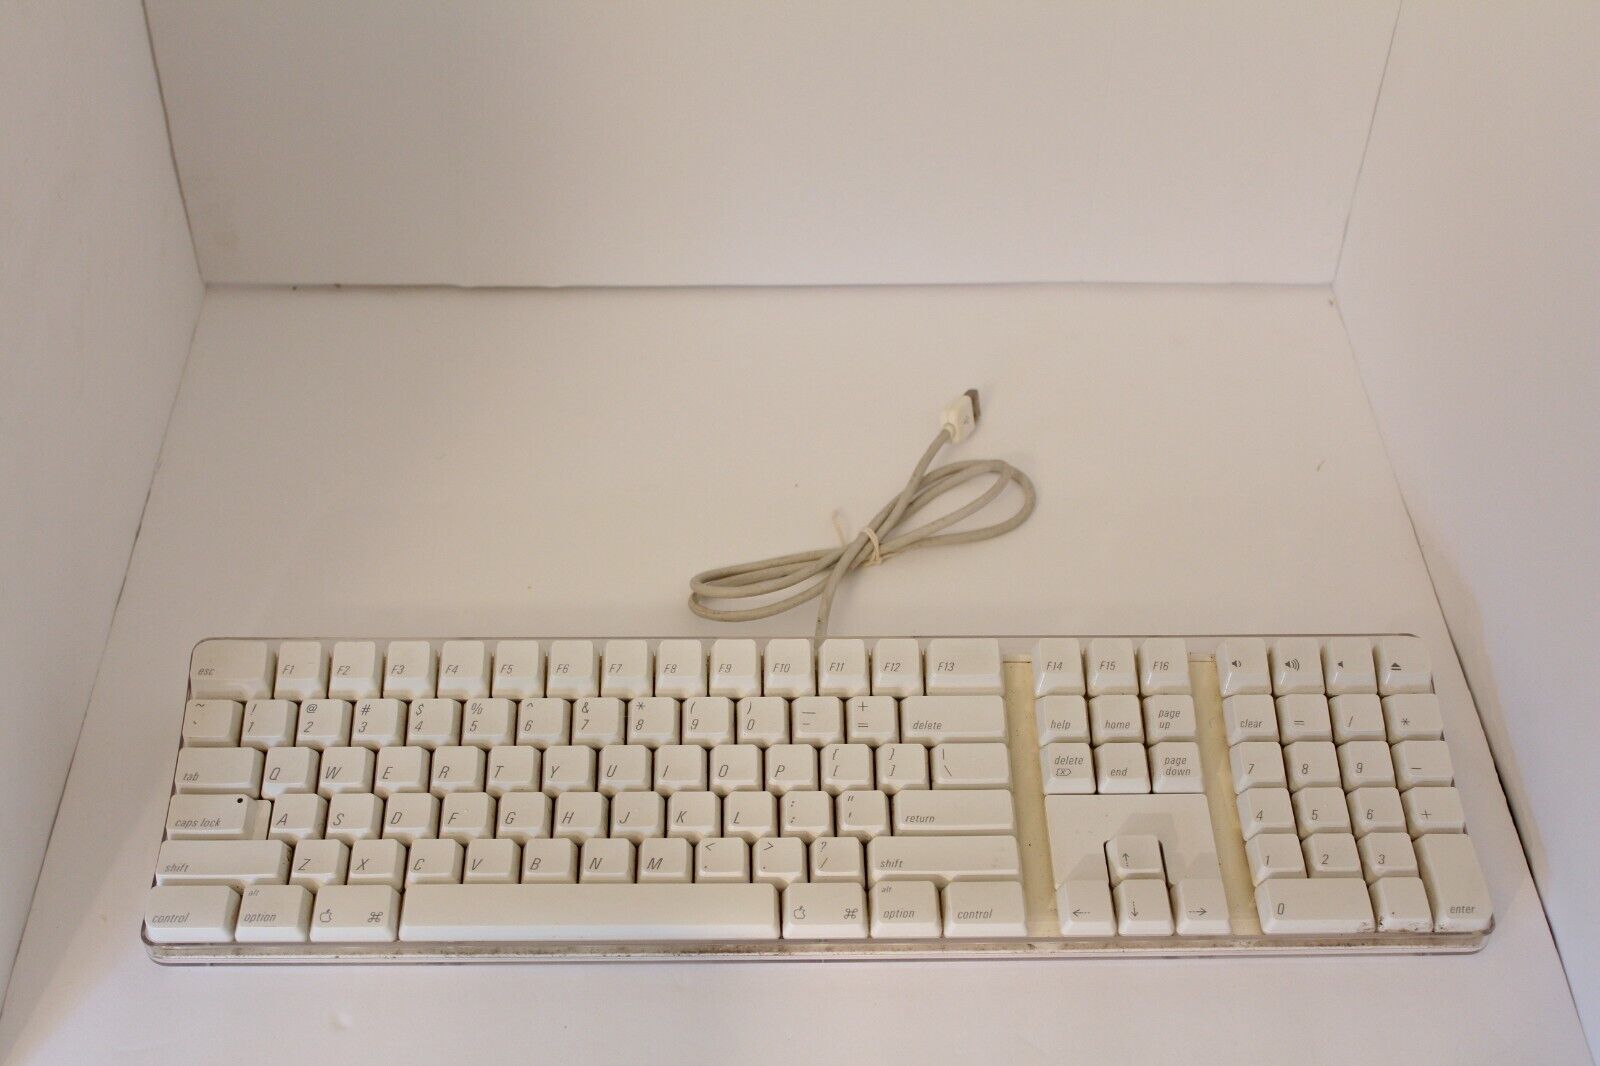 Vintage Apple Keyboard A1048 (White) Wired Full Sized USB Good Condition